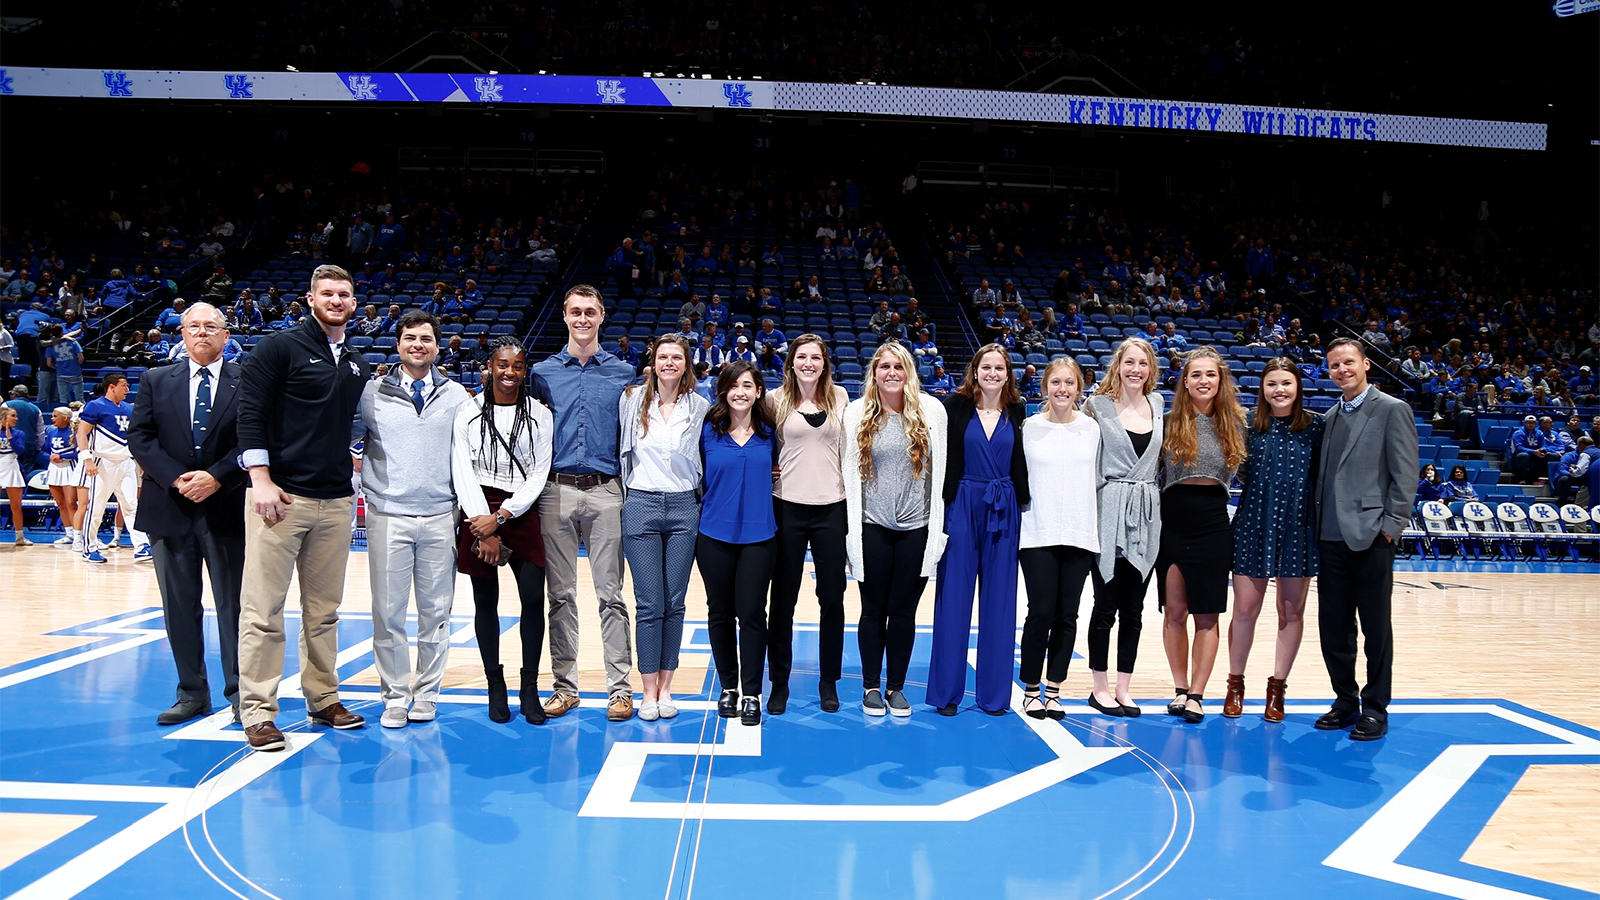 14 Wildcats to be Inducted into Frank G. Ham Society of Character